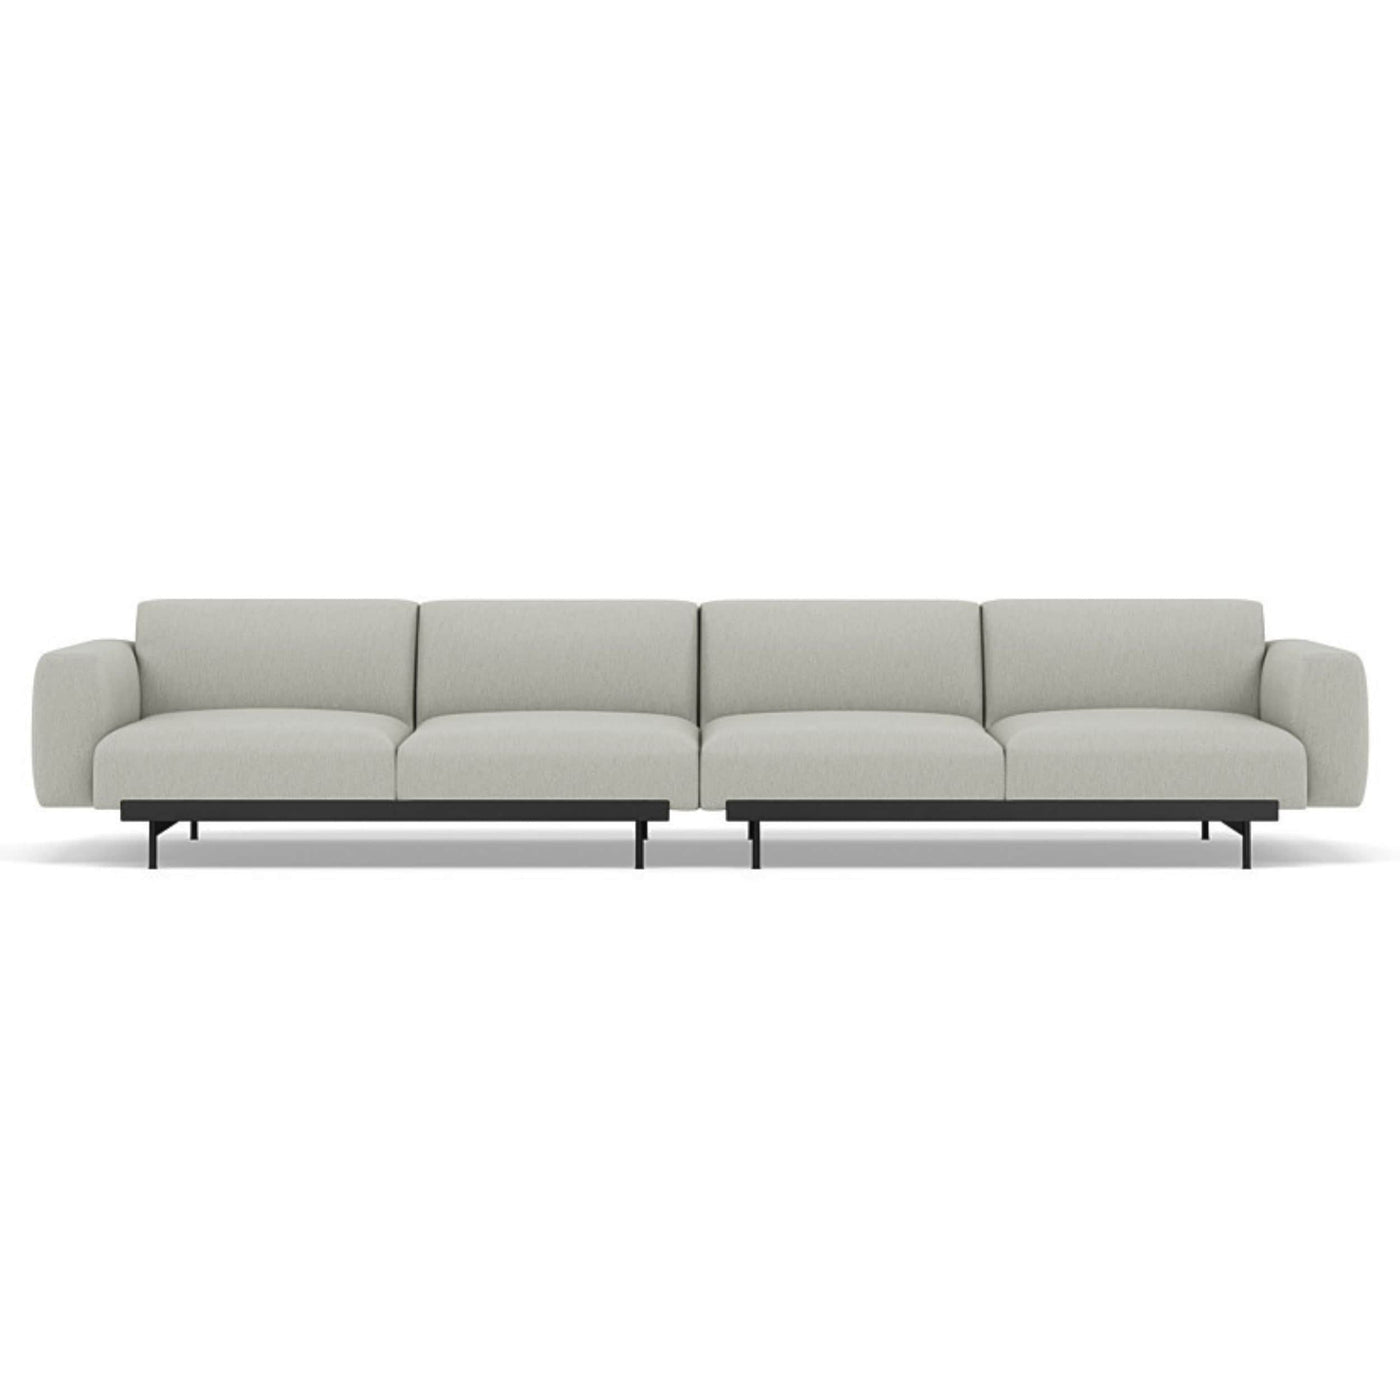 Muuto In Situ Modular 4 Seater Sofa configuration 1 in clay 12. Made to order from someday designs. #colour_clay-12